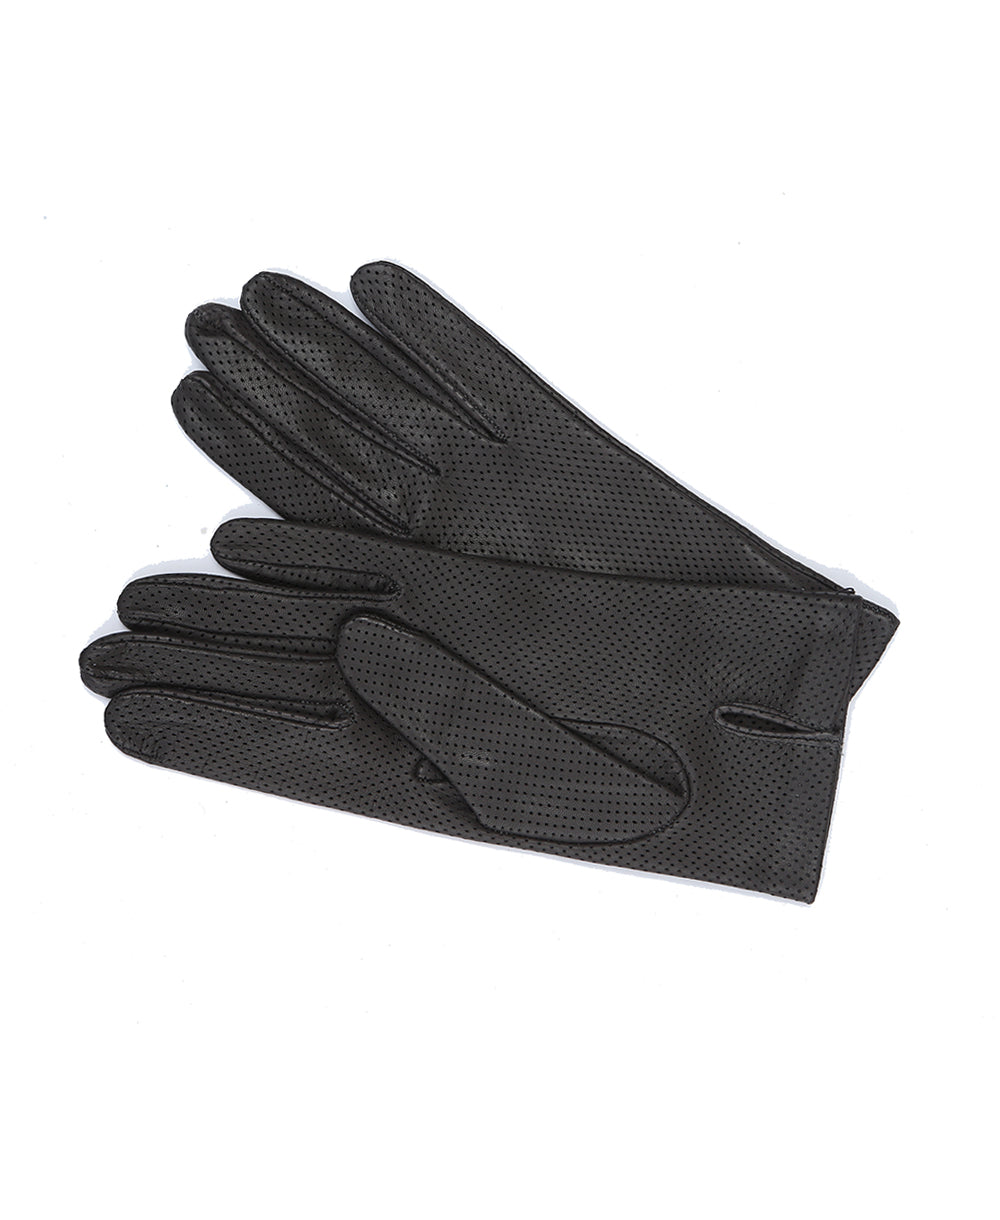 Ladies Italian Nappa Leather Punched Gloves Dark Grey